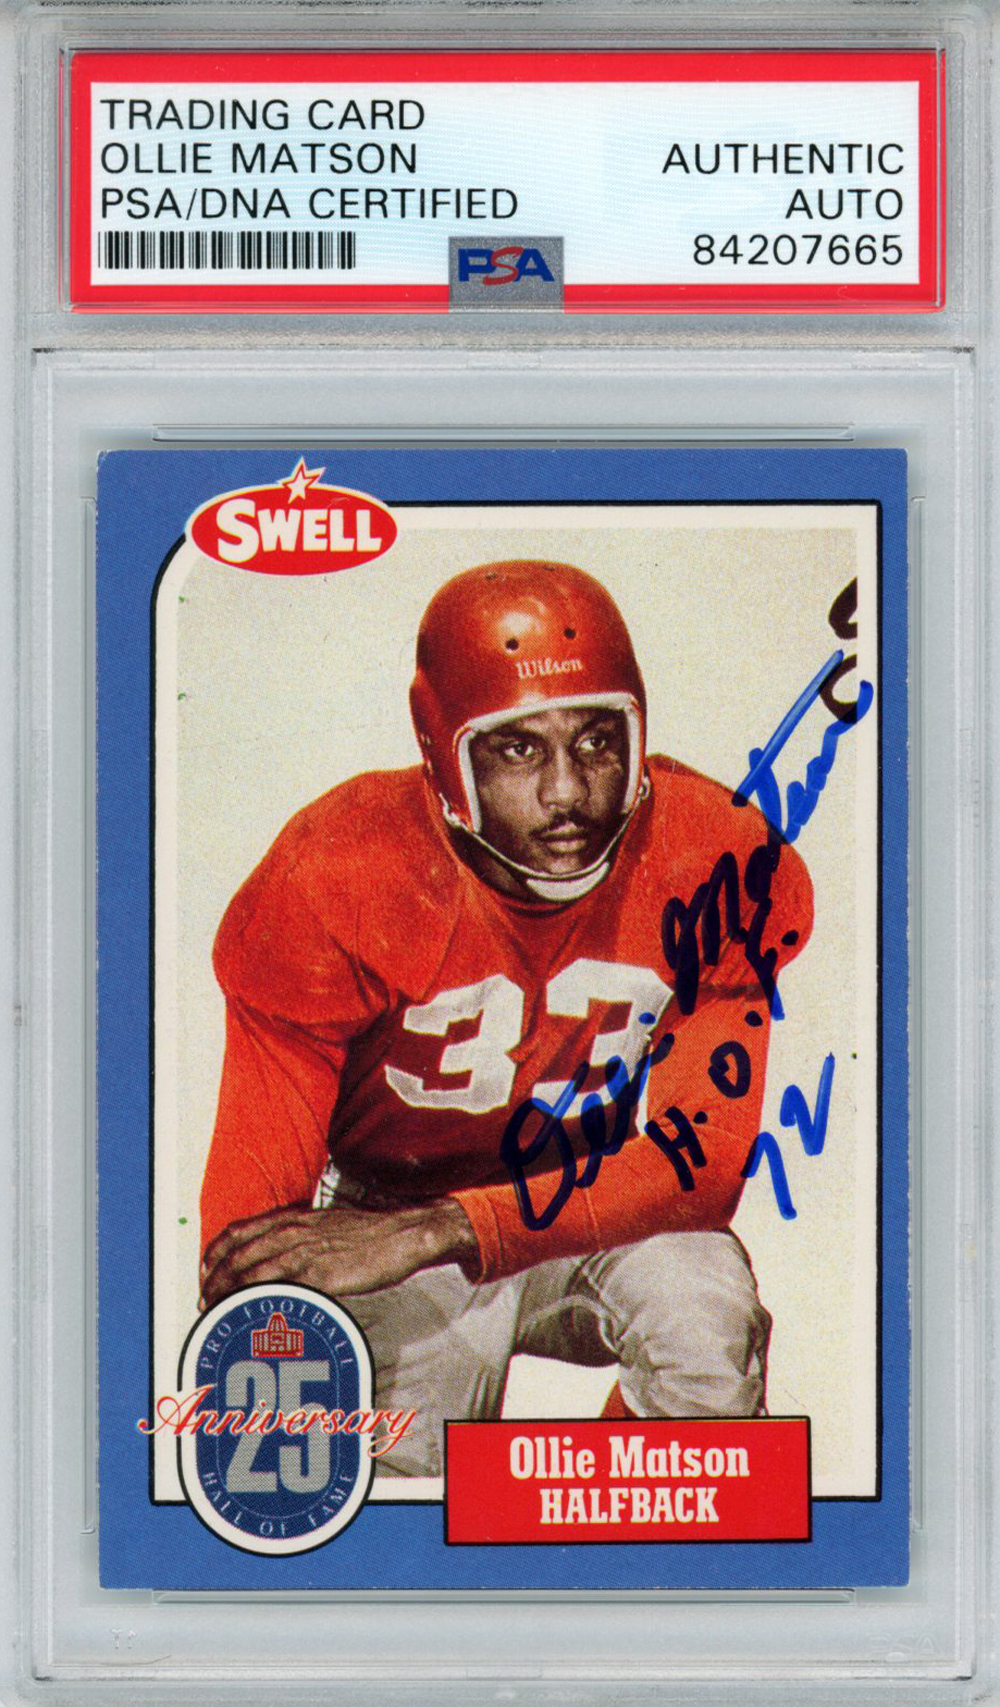 Ollie Matson Autographed/Signed 1988 Swell #77 Trading Card PSA Slab 33007